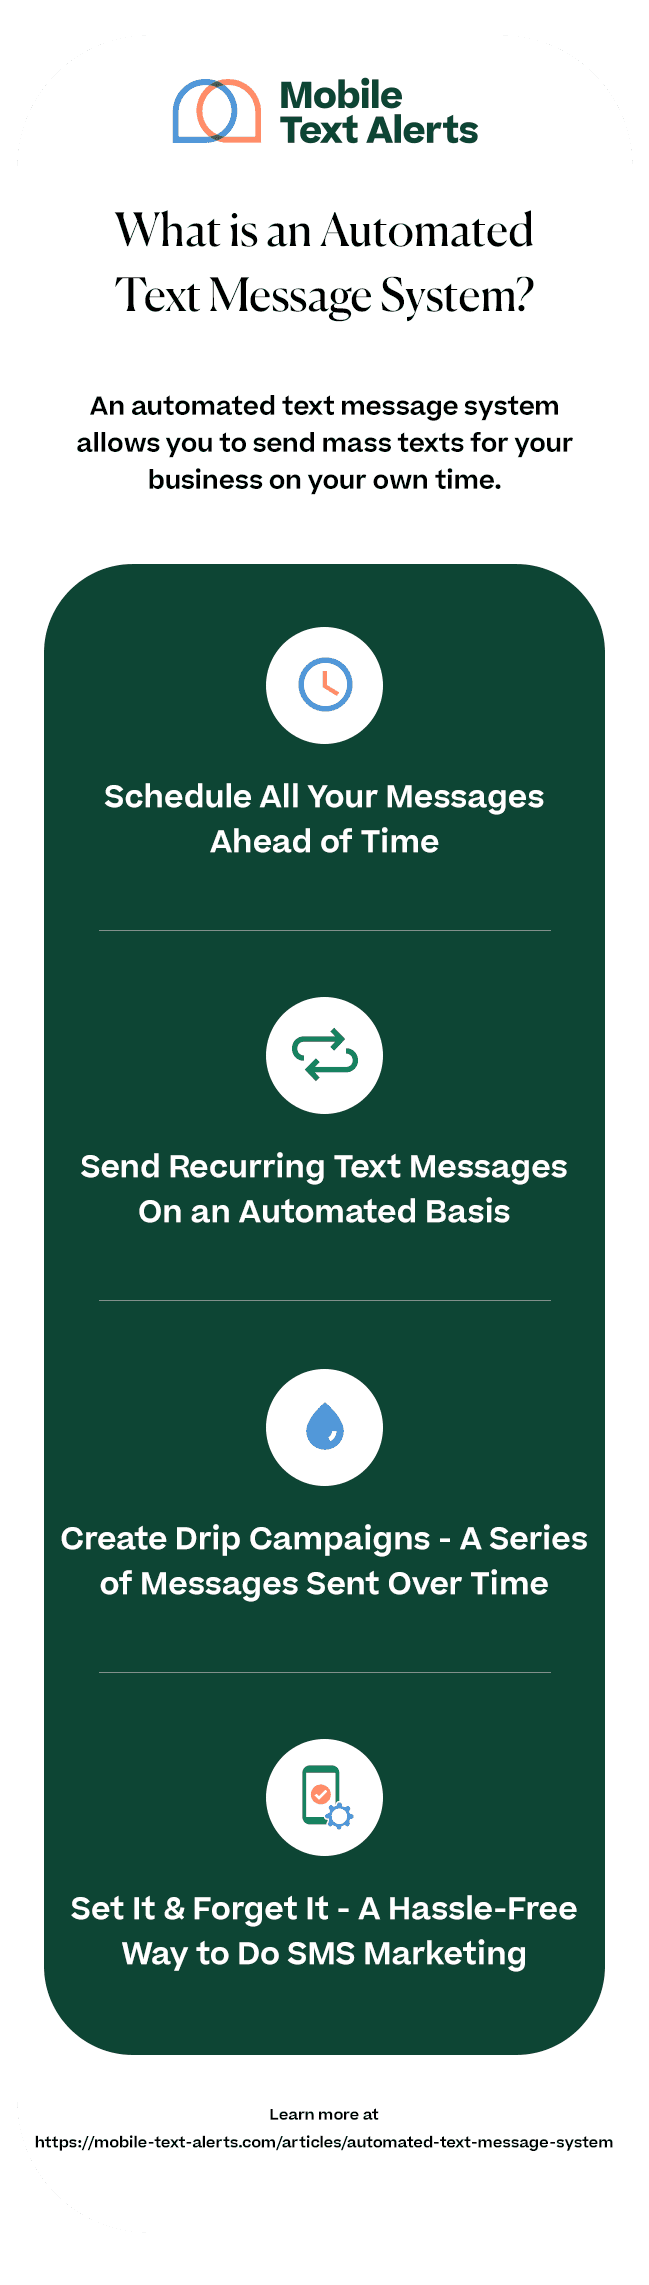 What is an automated text message system?